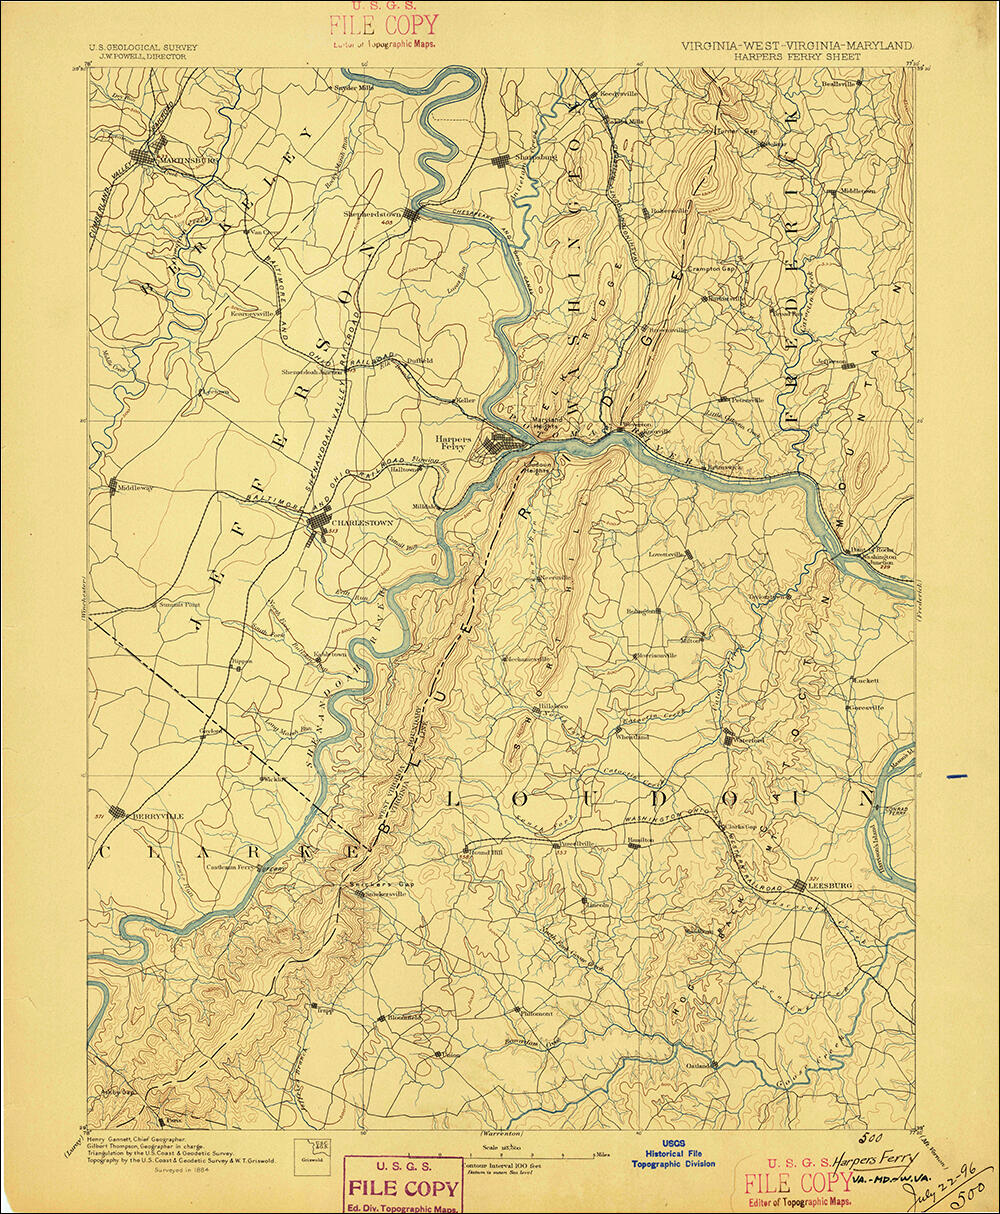 1894 USGS 30 minute quadrangle of the Harpers Ferry, Maryland area.